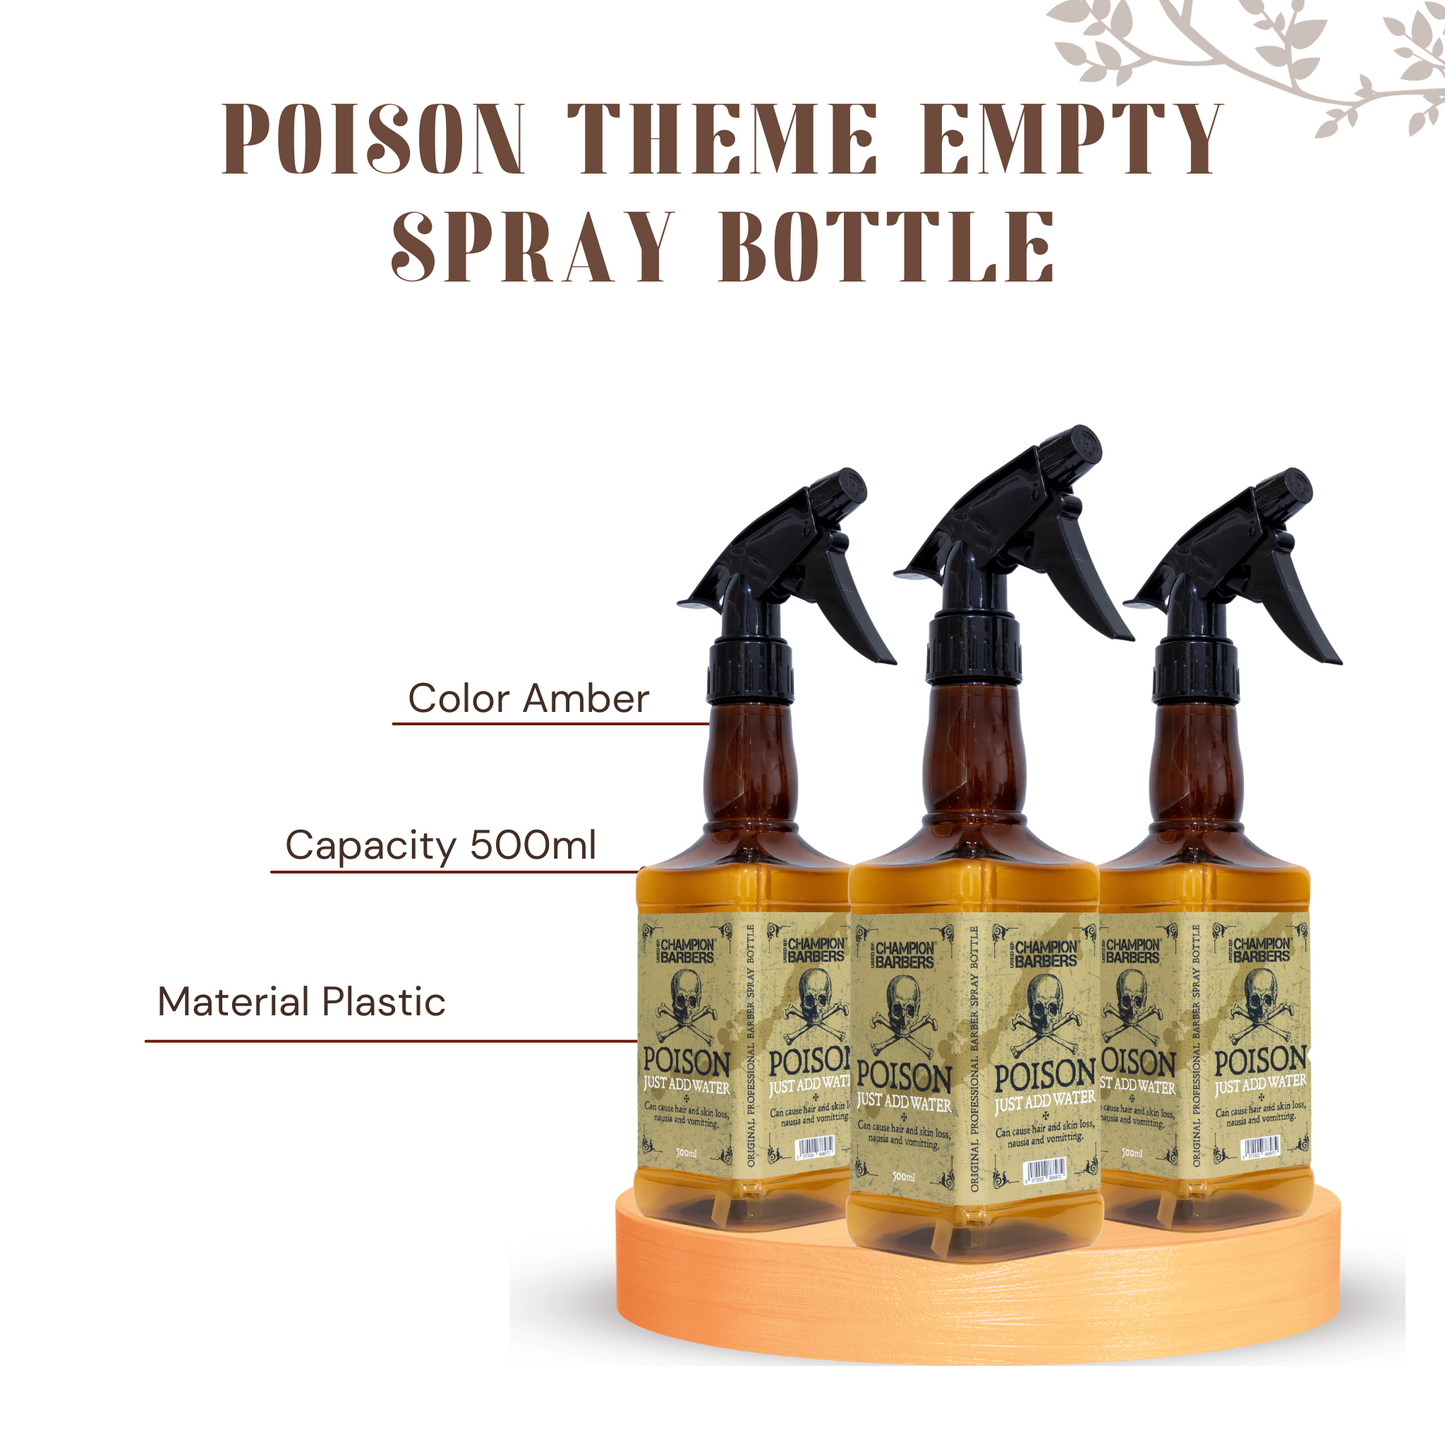 Champion Barbers – High Quality Plastic Spray Bottle | 500ml | Amber Colour | Ideal Spray Bottles for Salons and Barbers | Poison-Themed